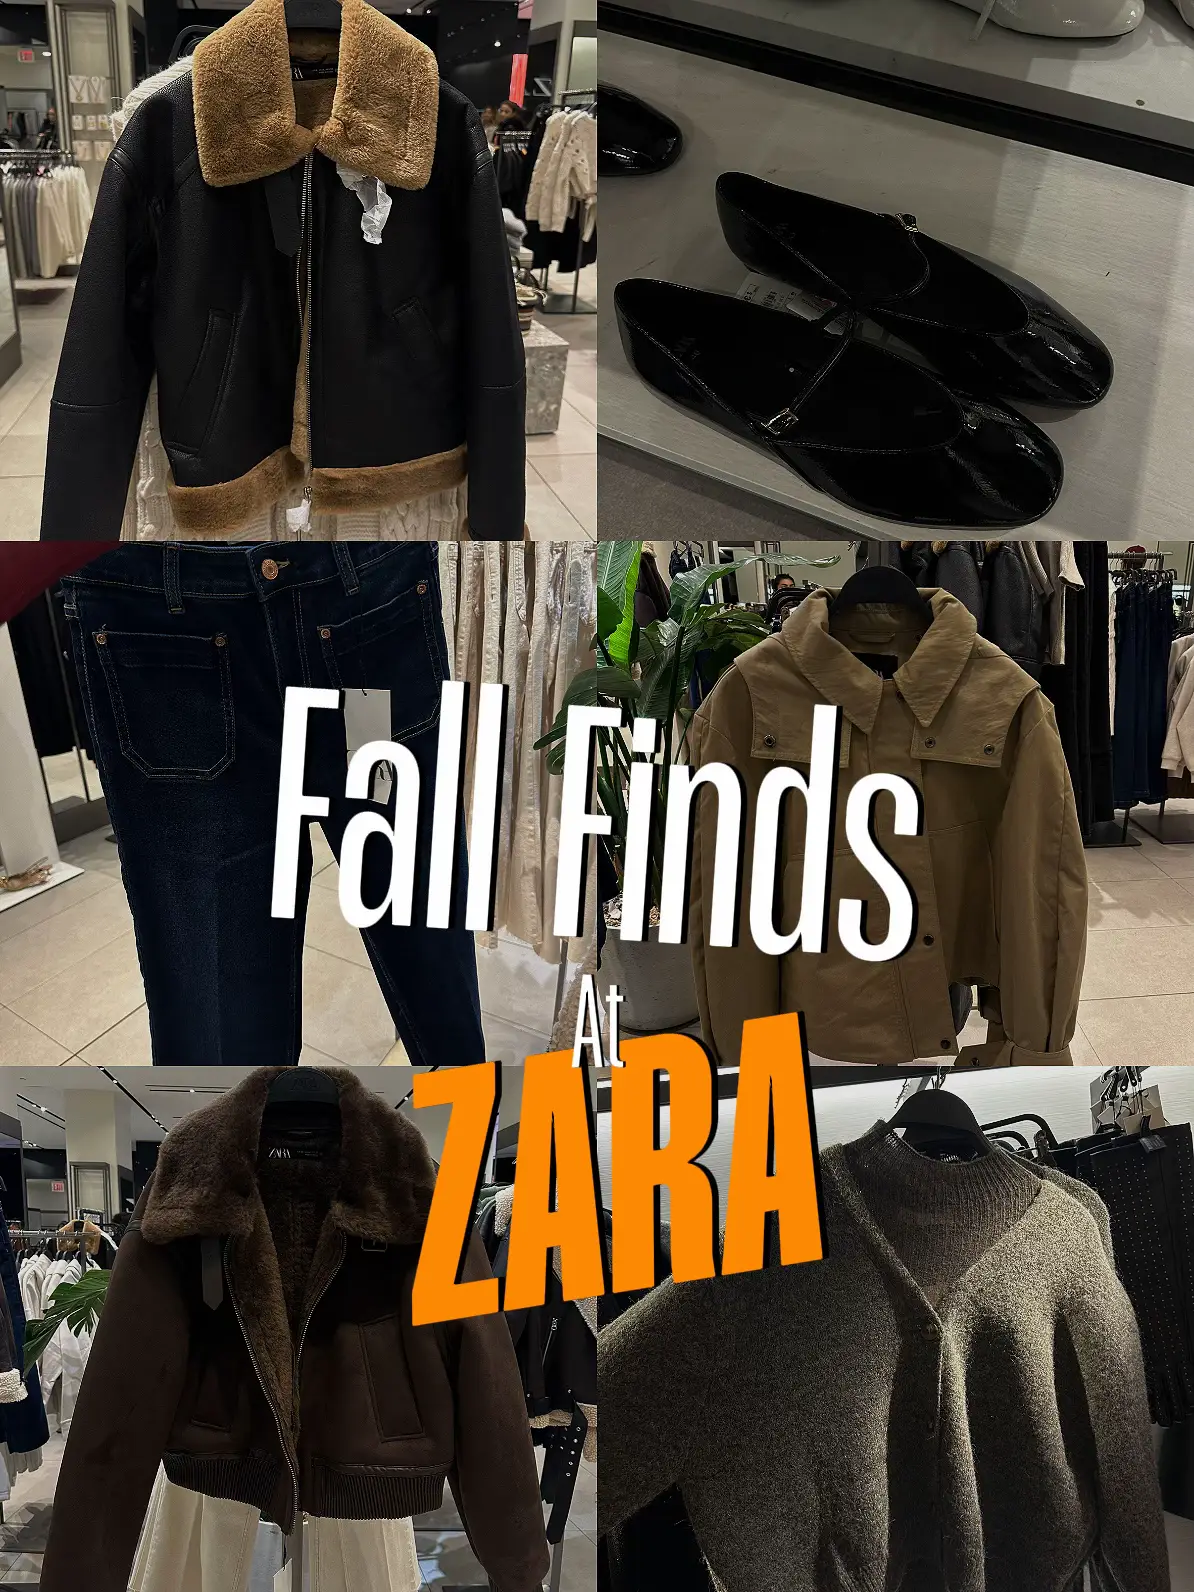 The 8 Items You Need from Zara's Fall Collection - Philadelphia